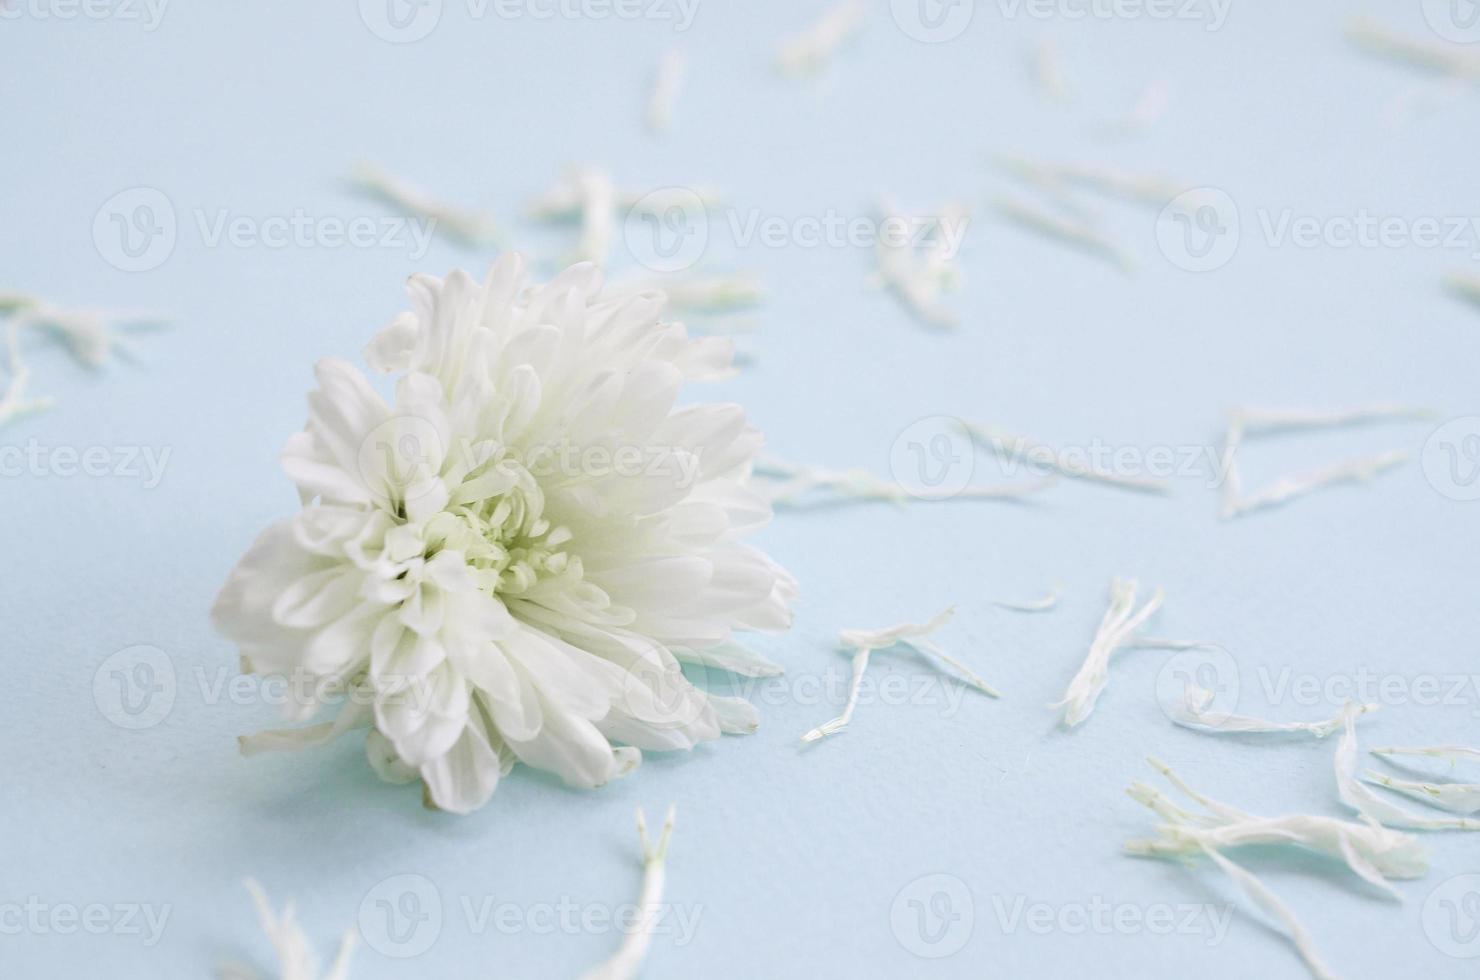 White Chrysanthemum flower head and many petals on pastel blue with blurred background photo